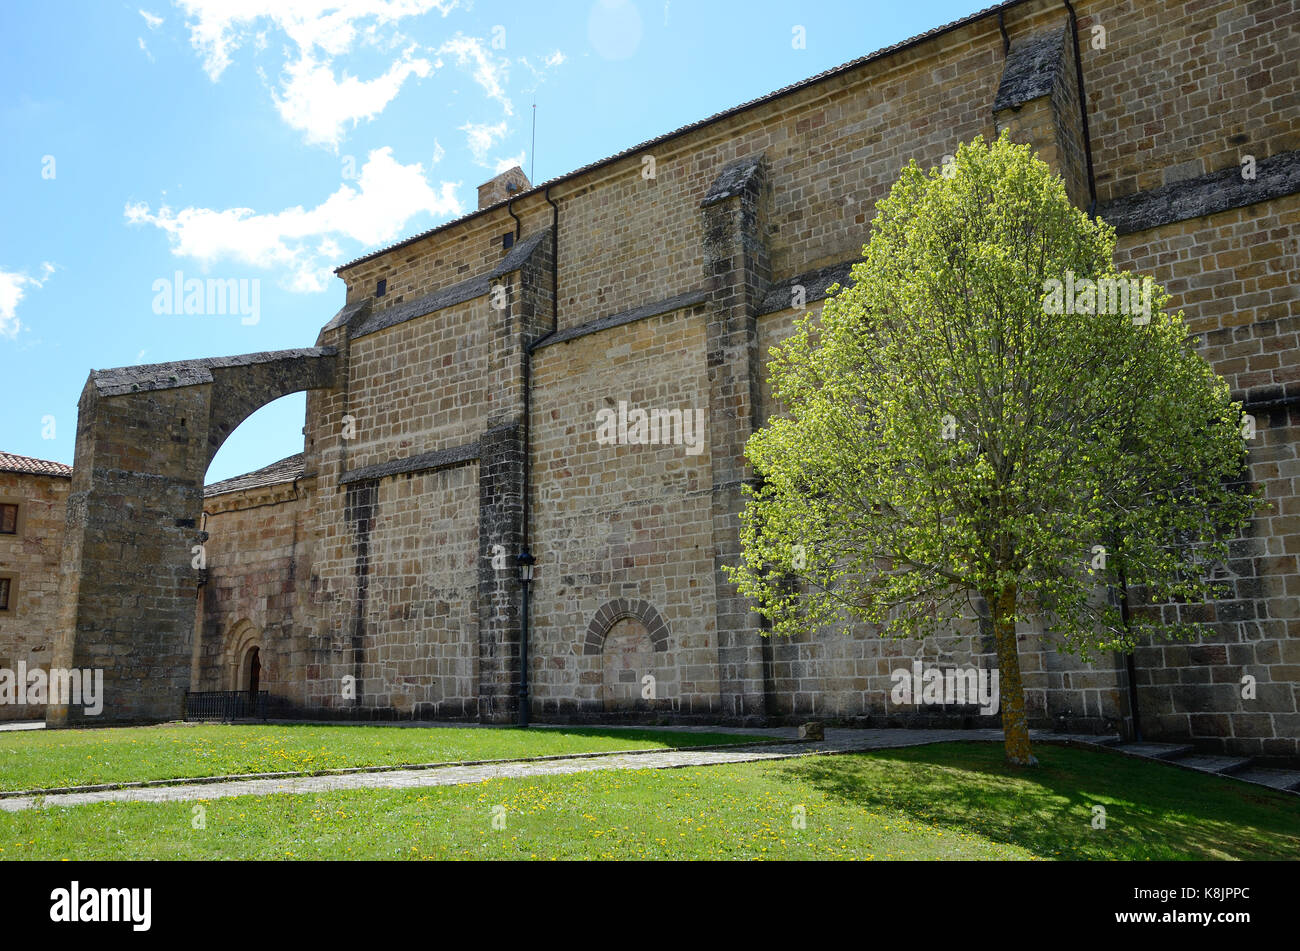 The Monastery of San Salvador of Leyre is one of the most important religious center and a place of Roman Catholic pilgrimage in Spain. Stock Photo